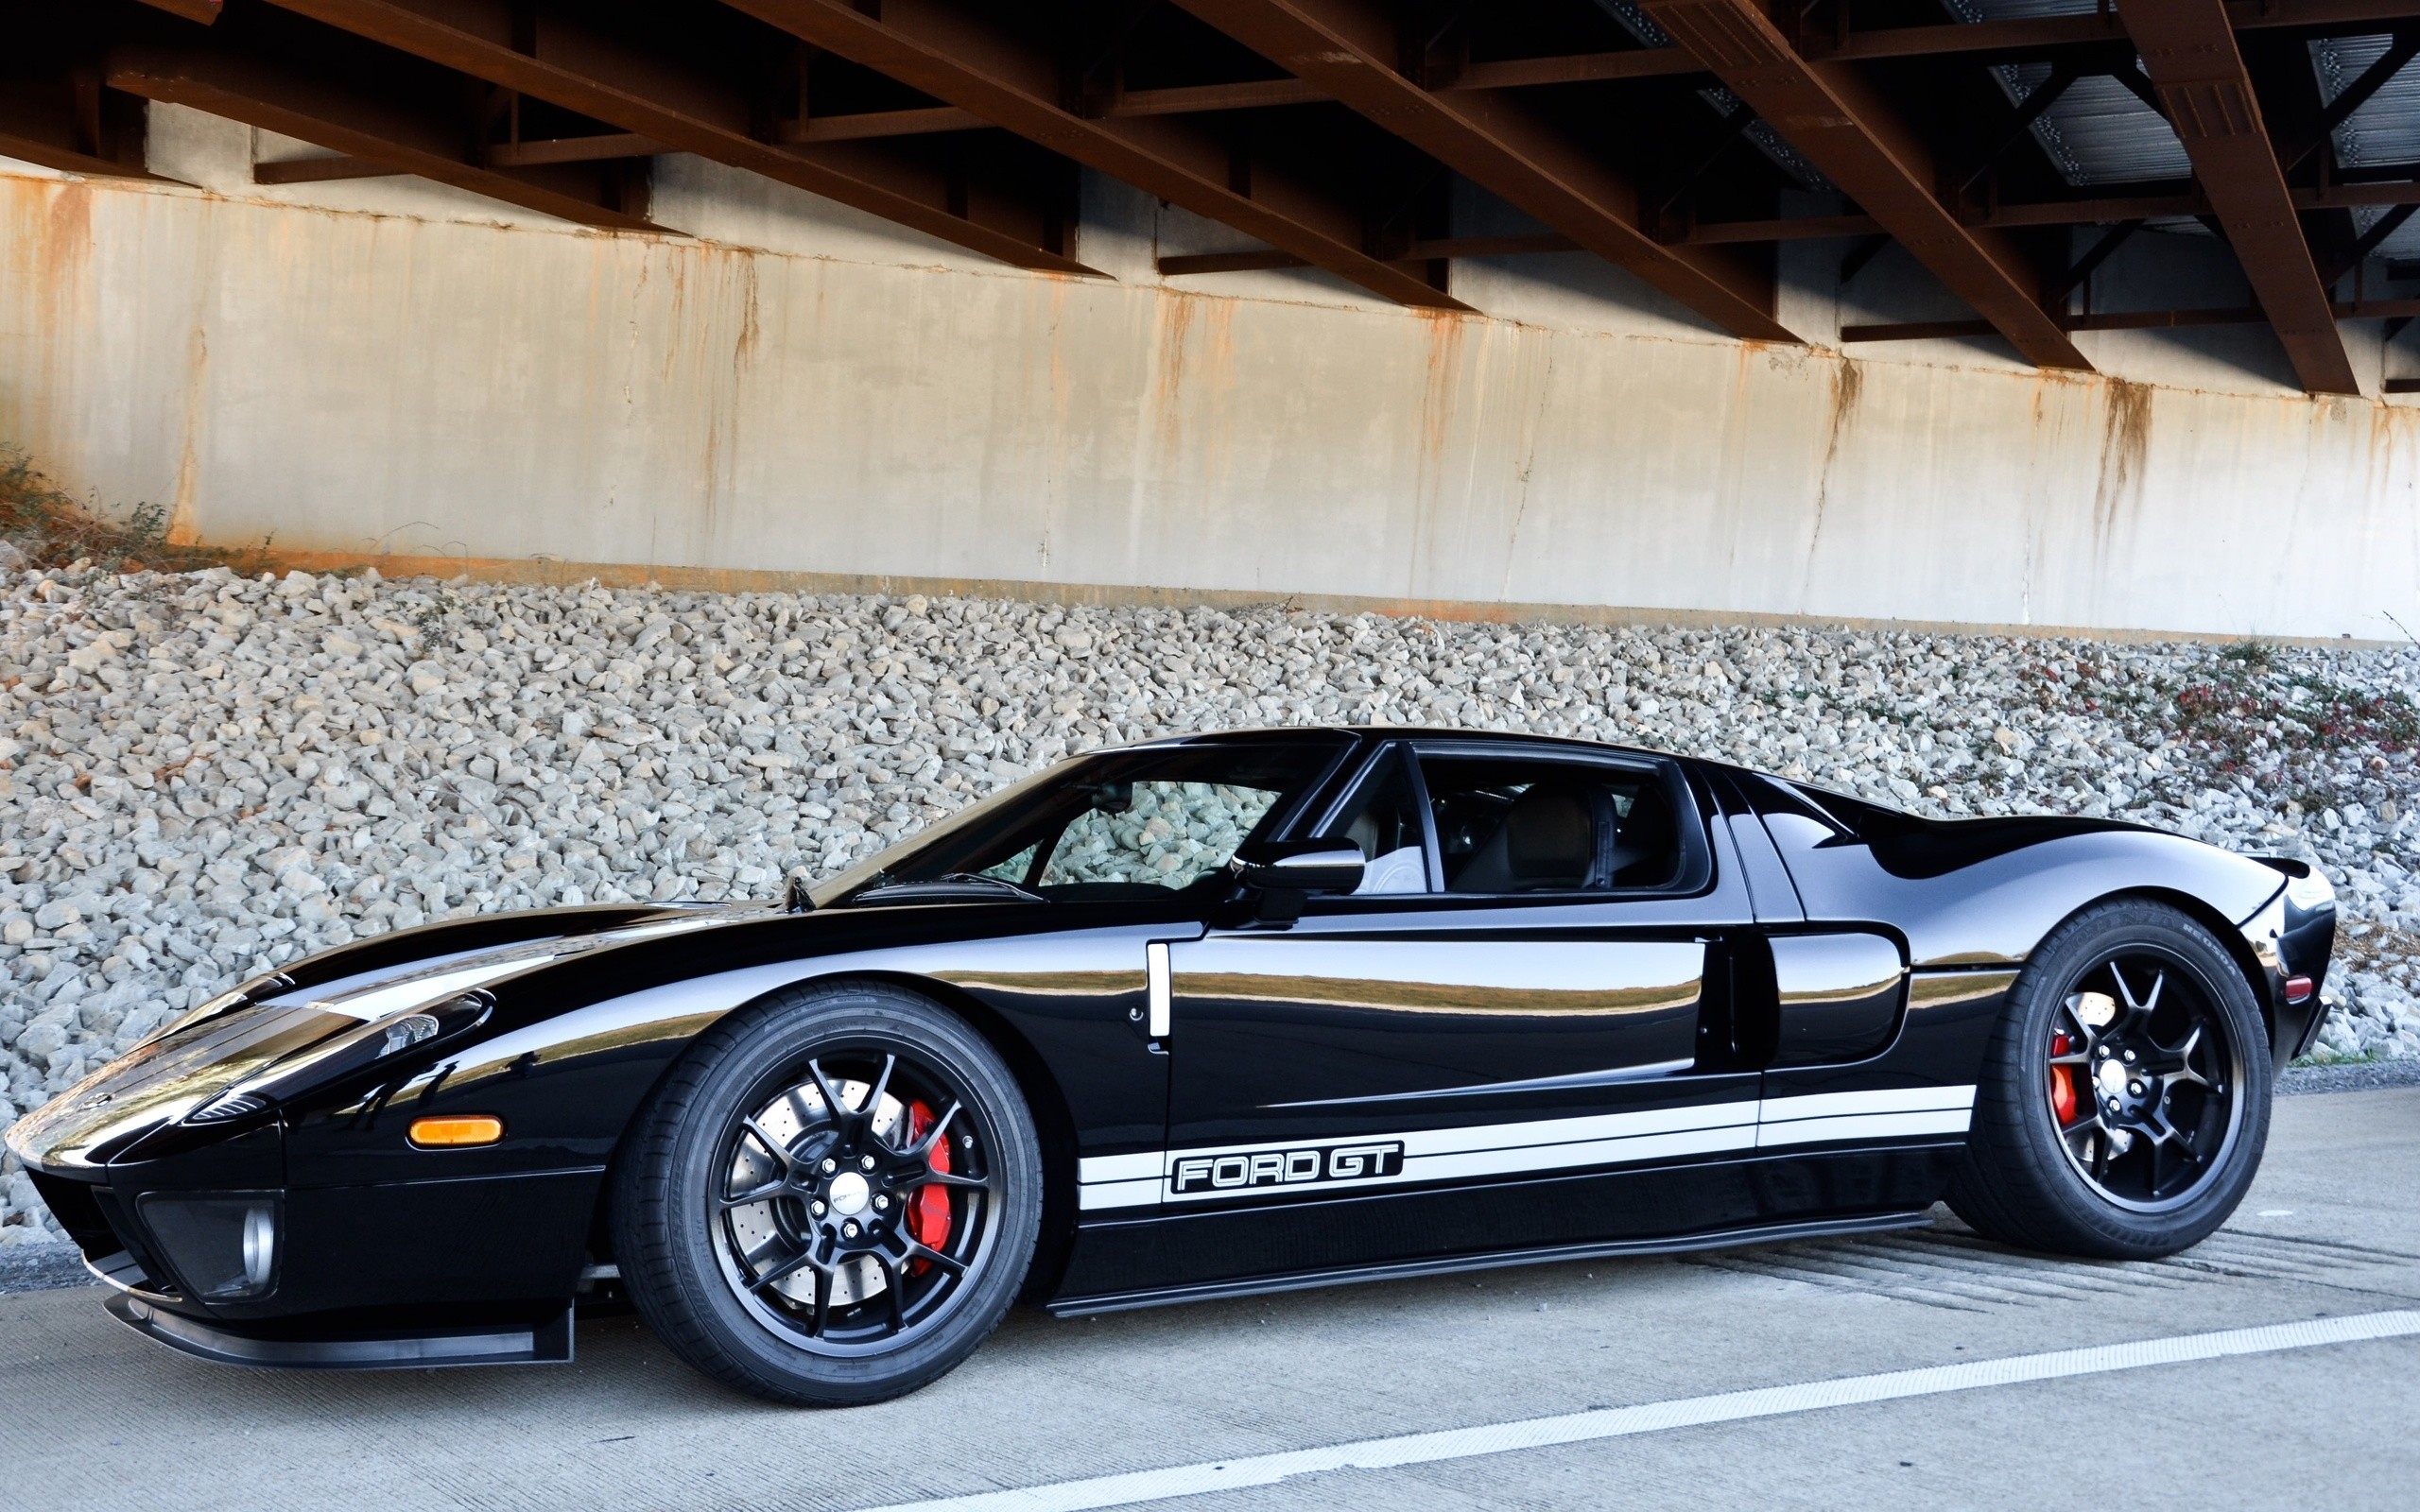 2560x1600 Photo: HDQ Ford GT Wallpapers, by Scotty Marvel